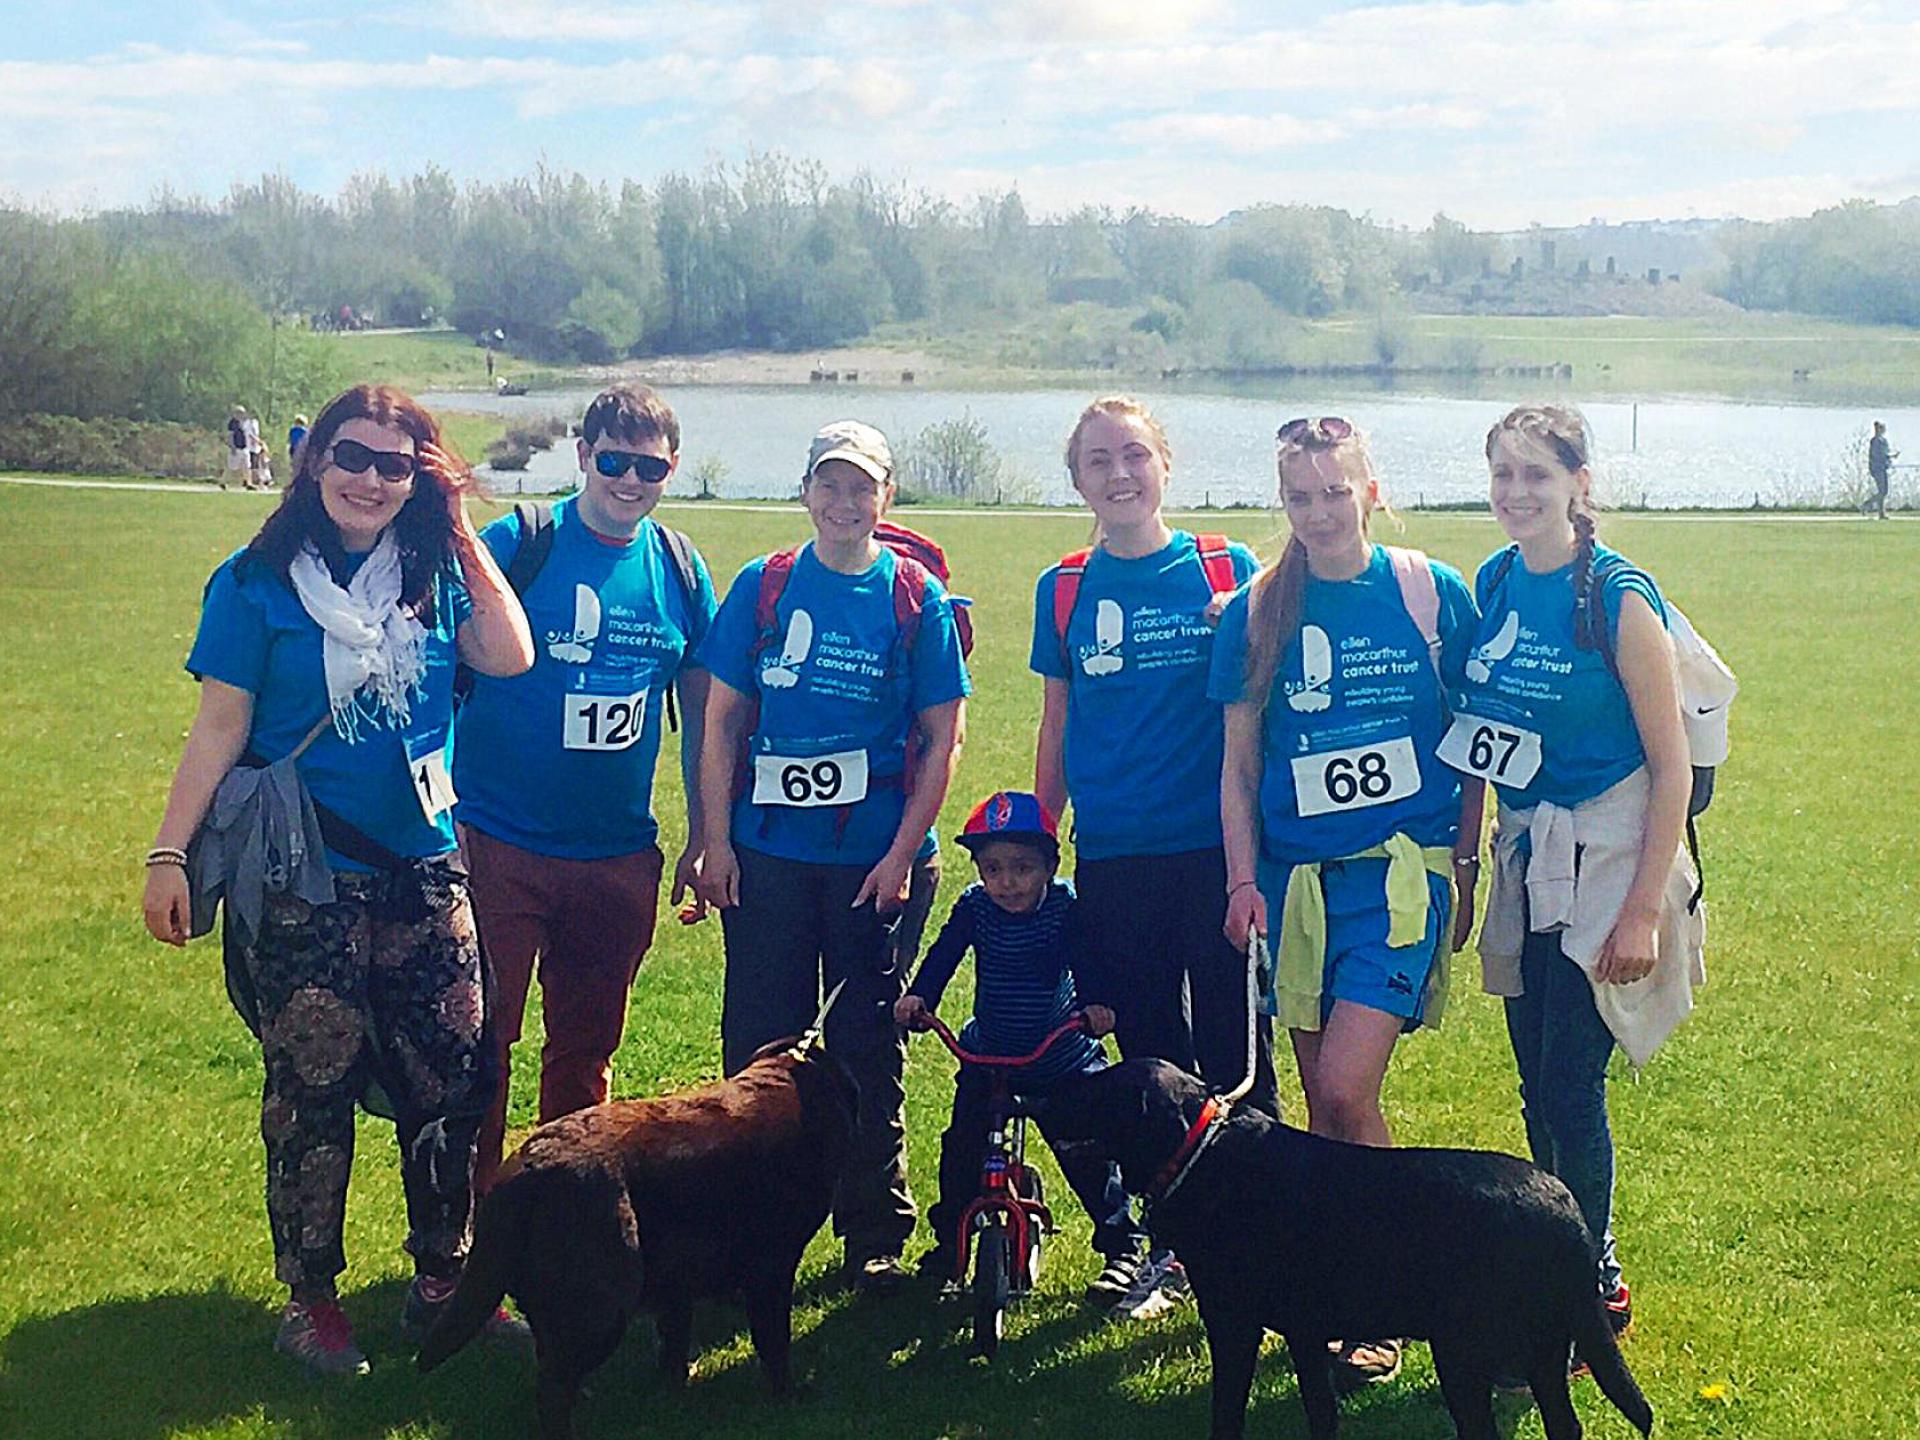 The Contours Charity Team gathered in blue t-shirts for the Great British Dog Walk